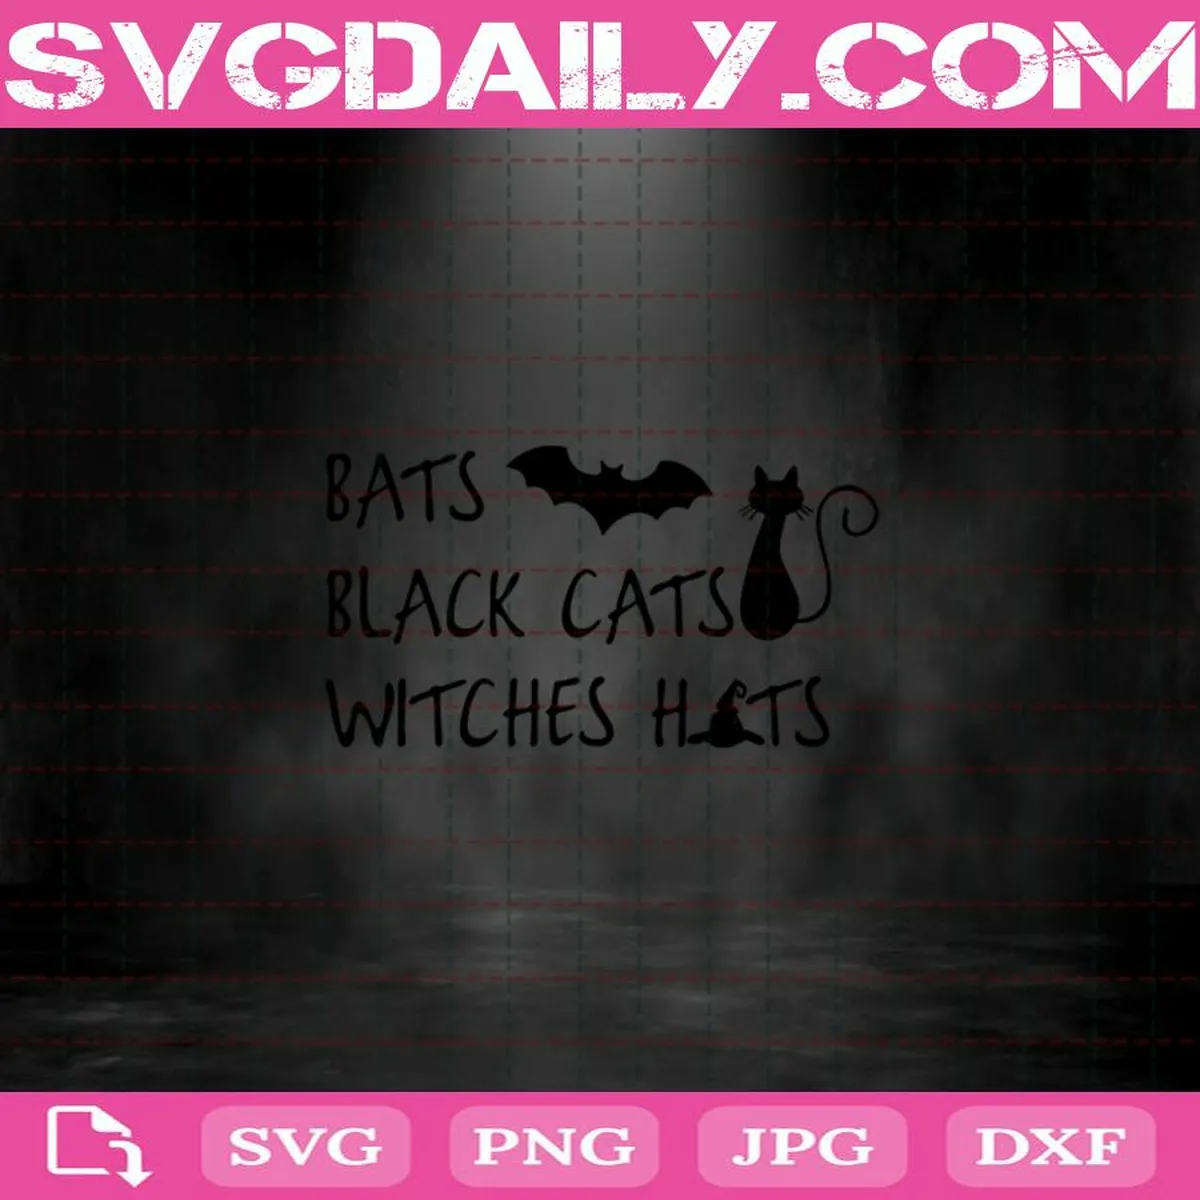 Bats Black Cats Witches Hats Svg, Halloween Svg, Cat Svg, Witches Svg, Witches Hats Svg